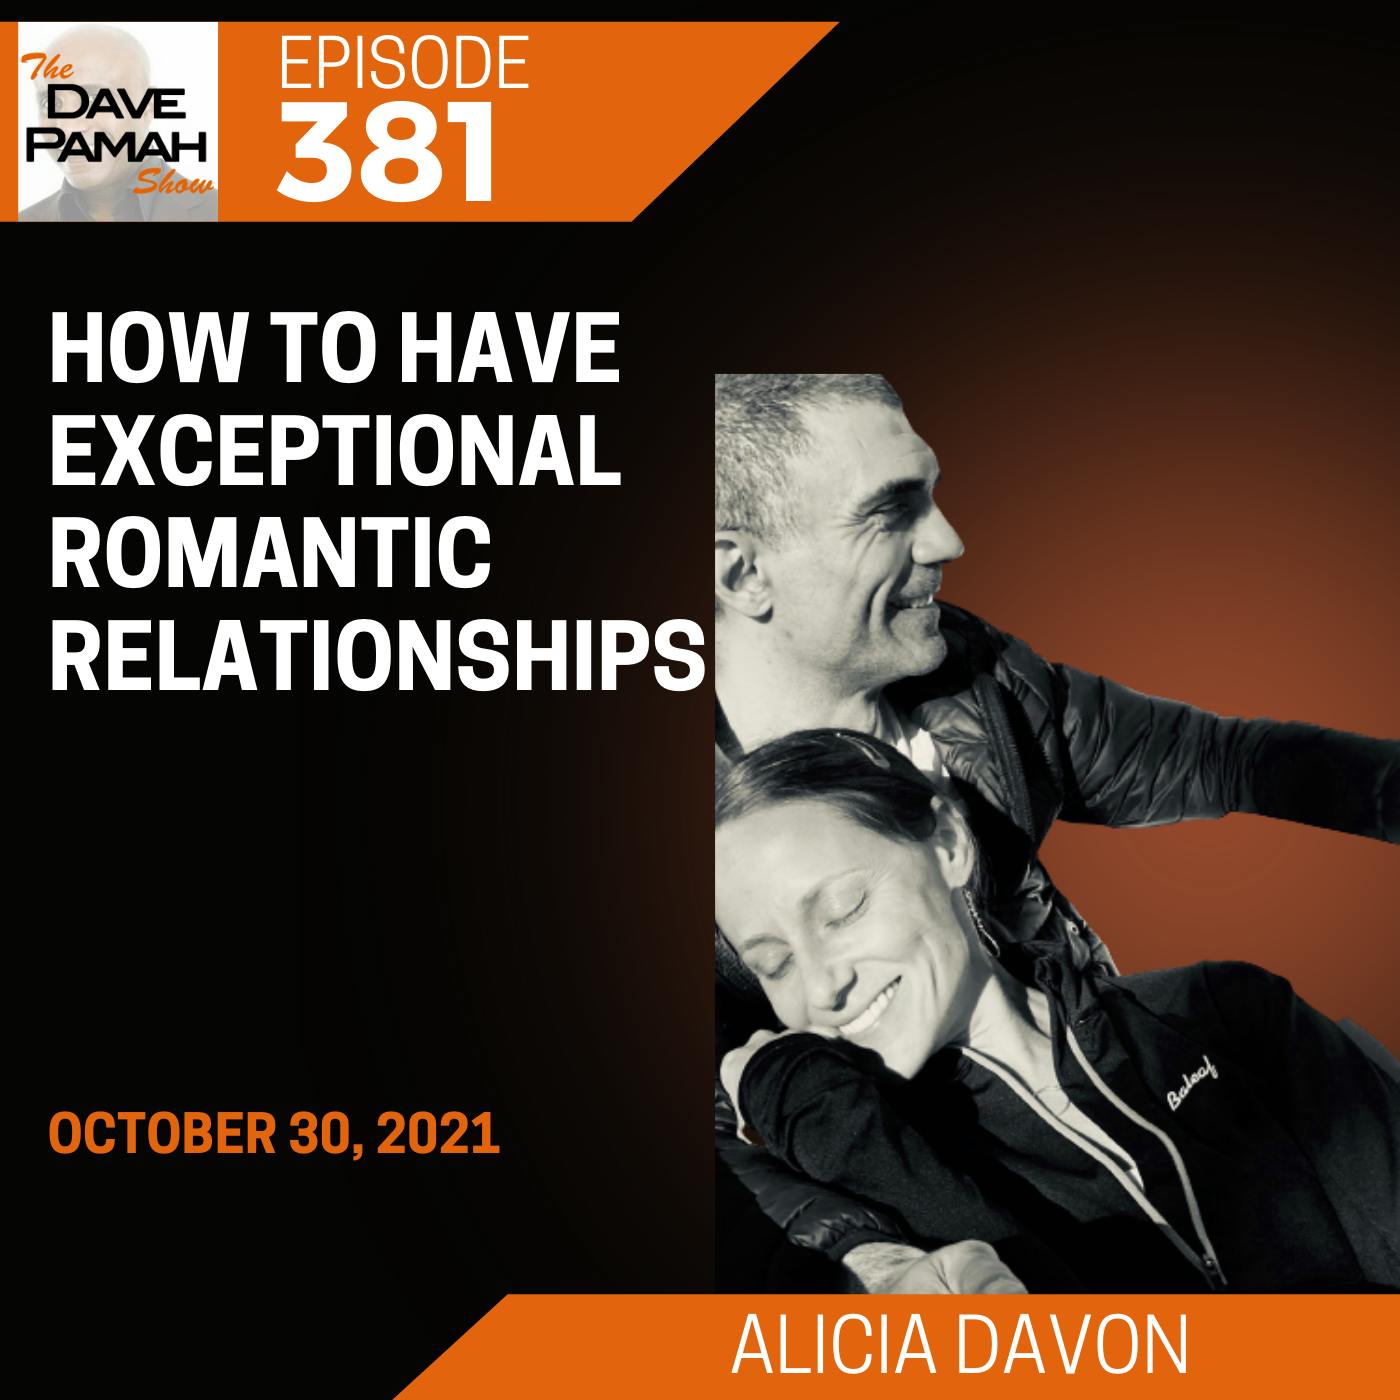 How to have exceptional romantic relationships with Alicia Davon